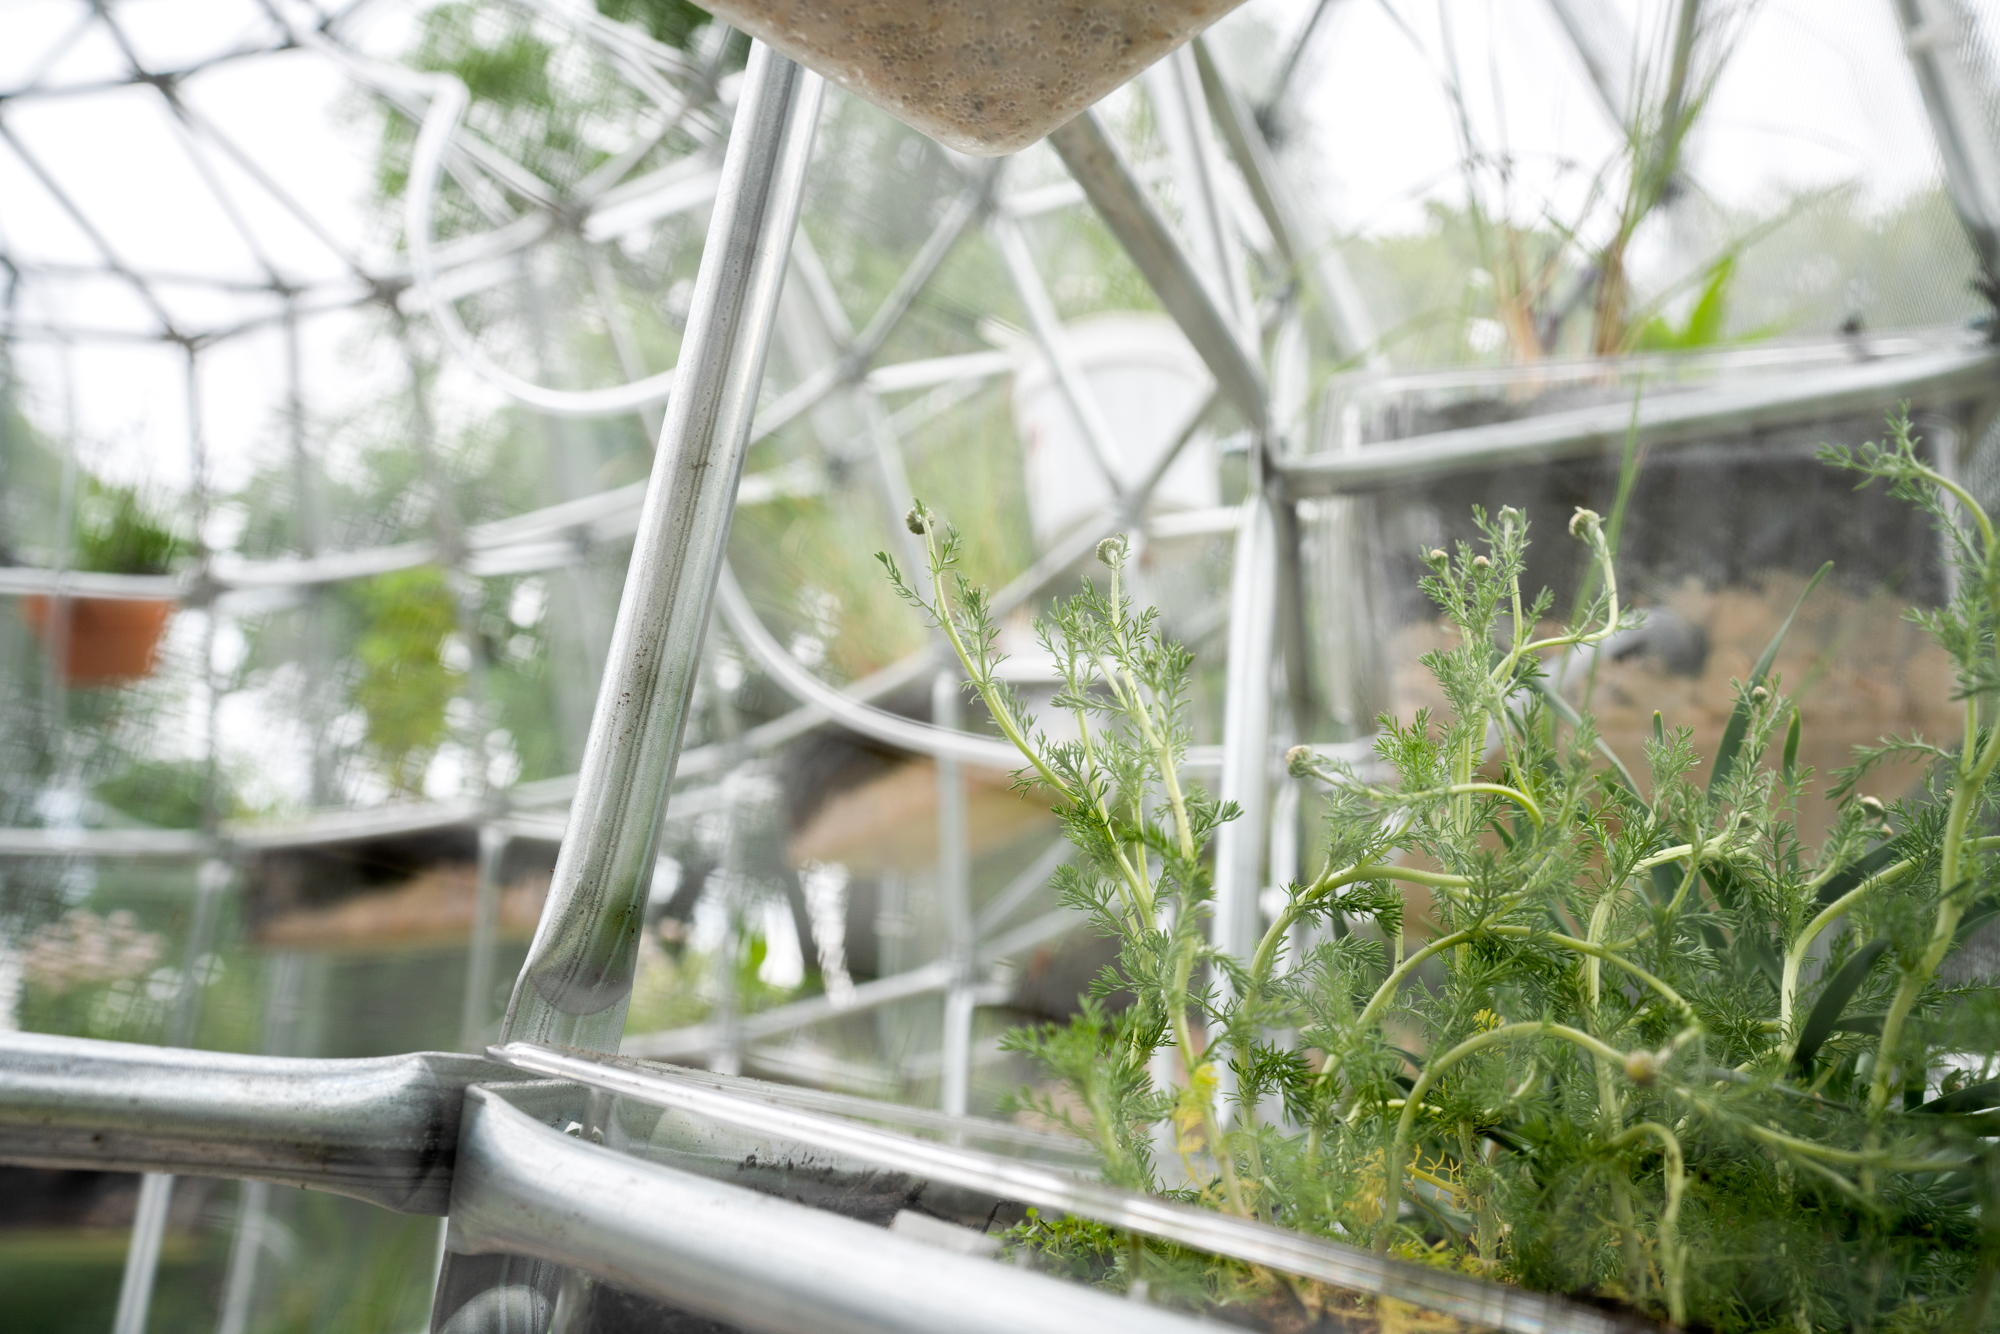 Another view of inside the sculpture, showing a close up of one of the plants sitting in the clear bins. It is a chamomile plant with soft, fern like fronds. Various tubes and metal bars poplulate the background. 